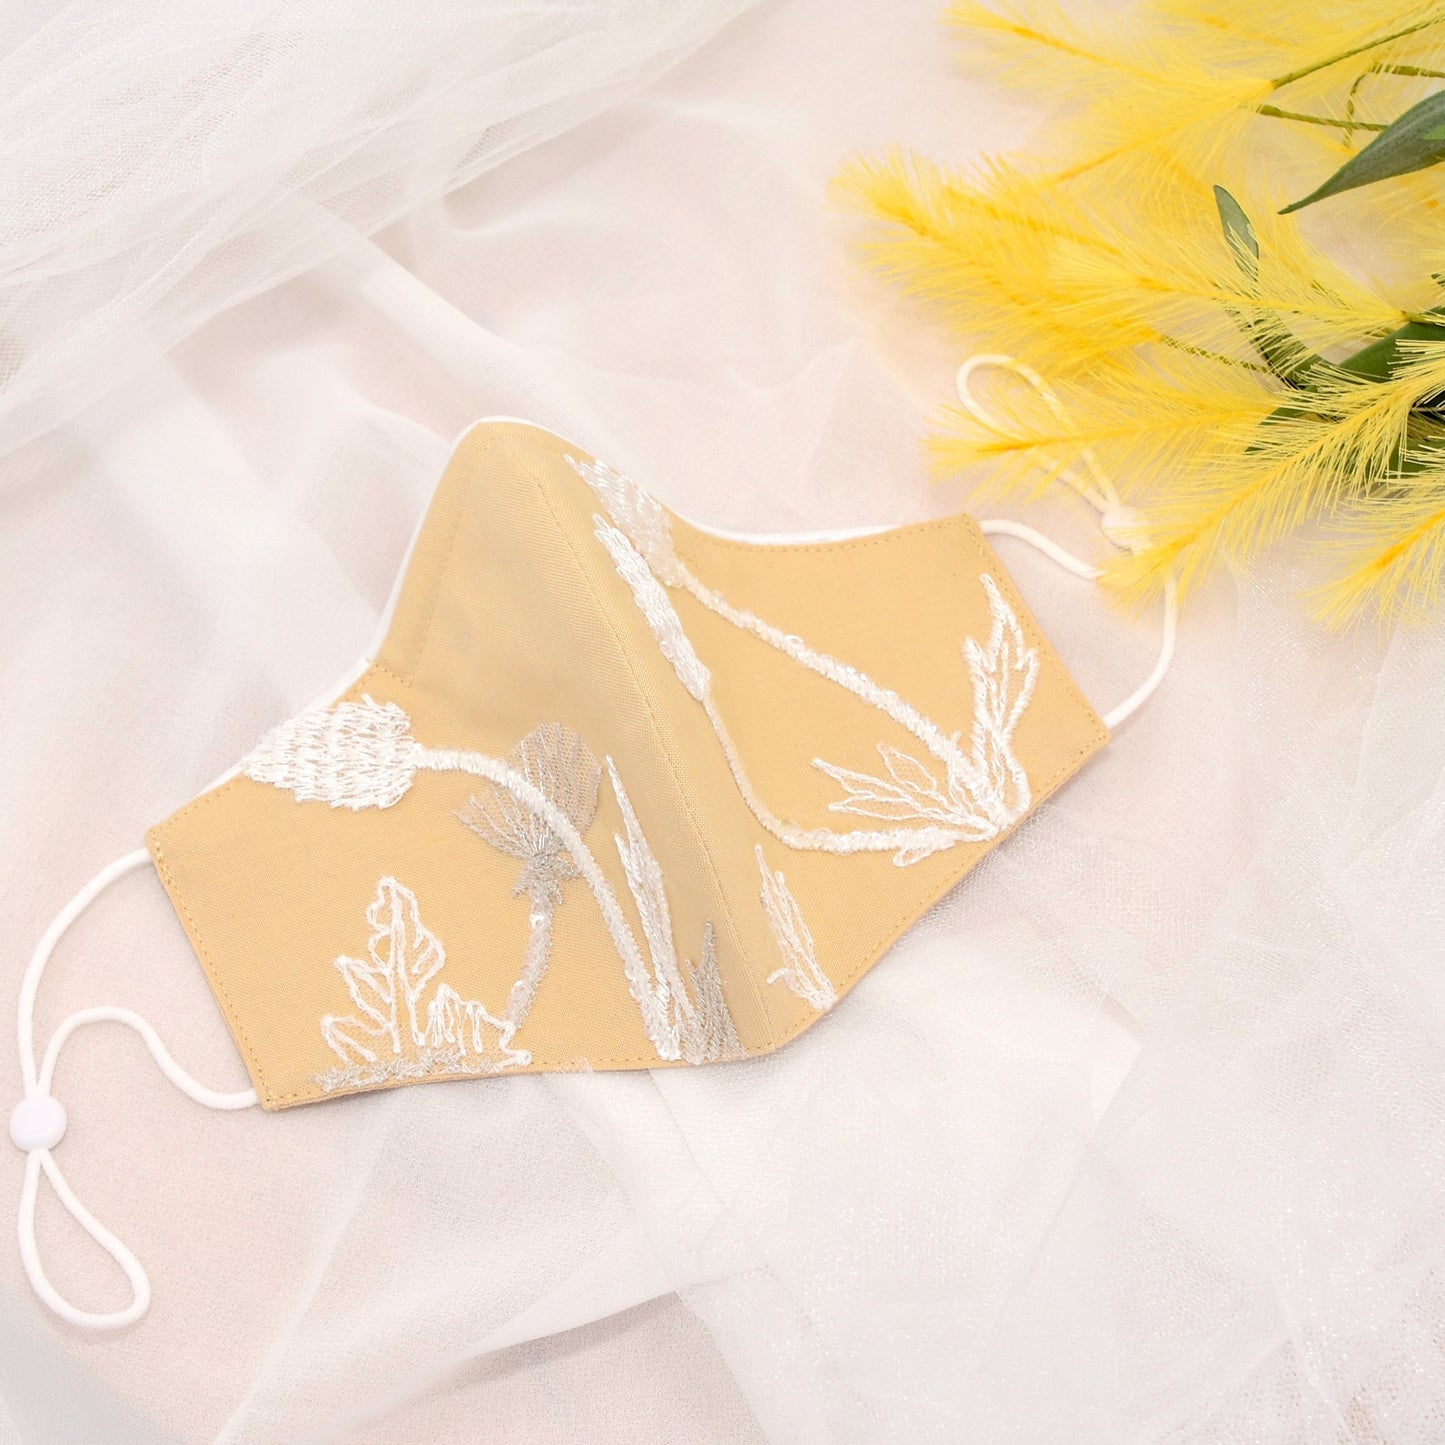 Wheat Beige Bridesmaid Face Mask with Embroidery Appliqué and White Satin Piping